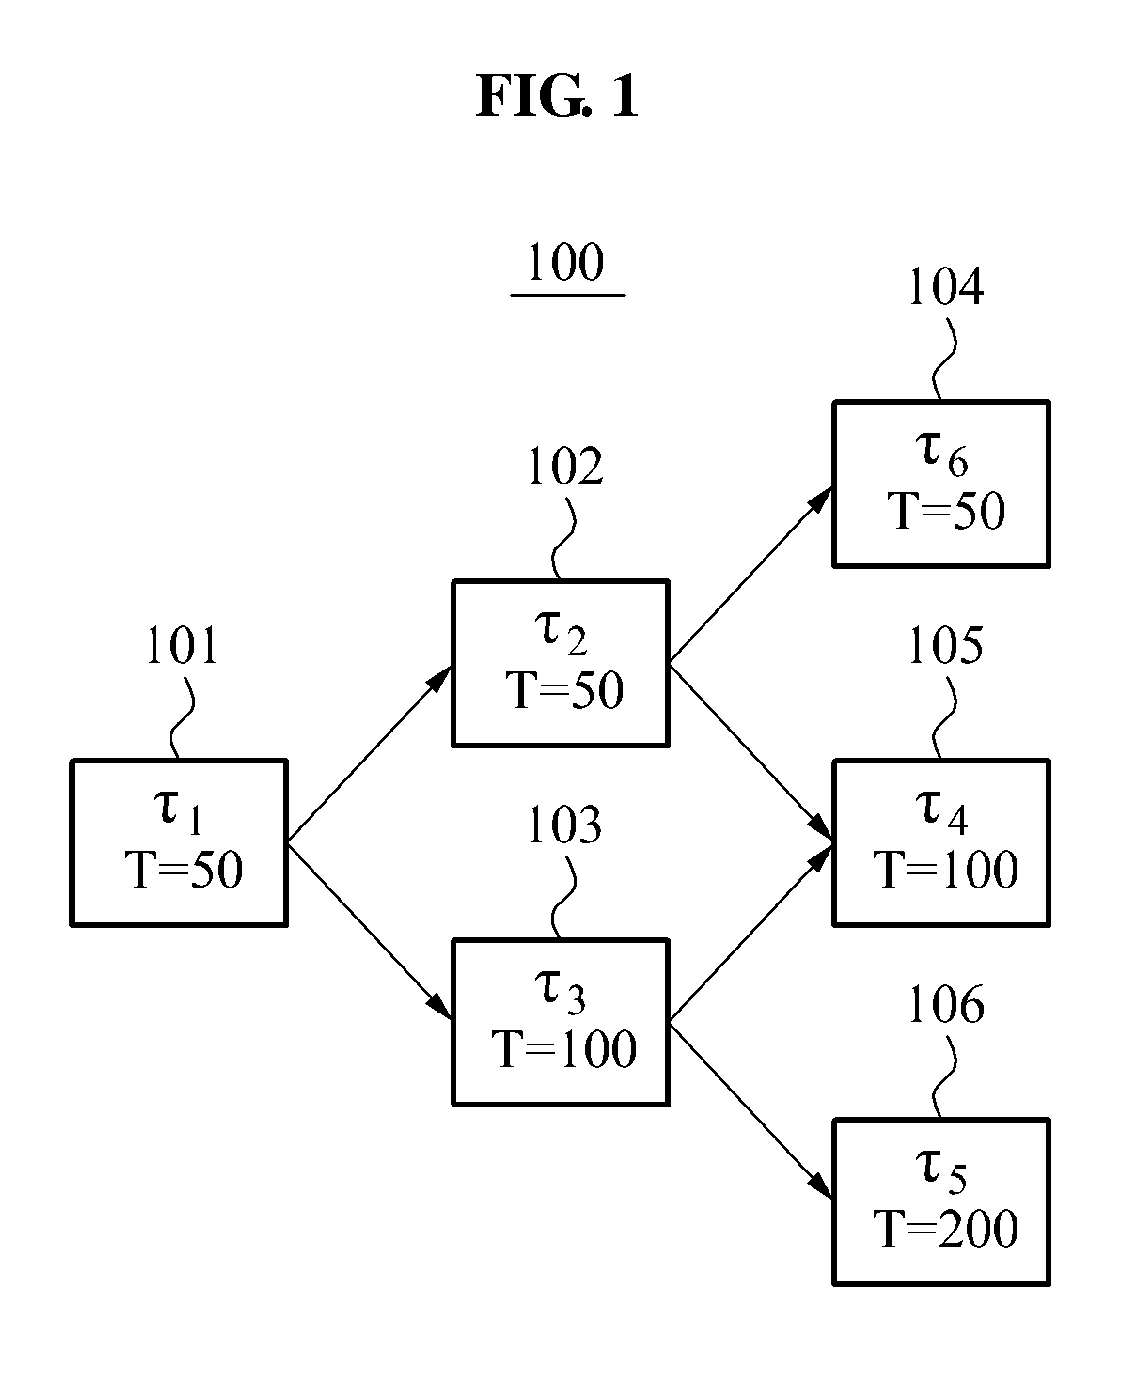 Task scheduling method and apparatus